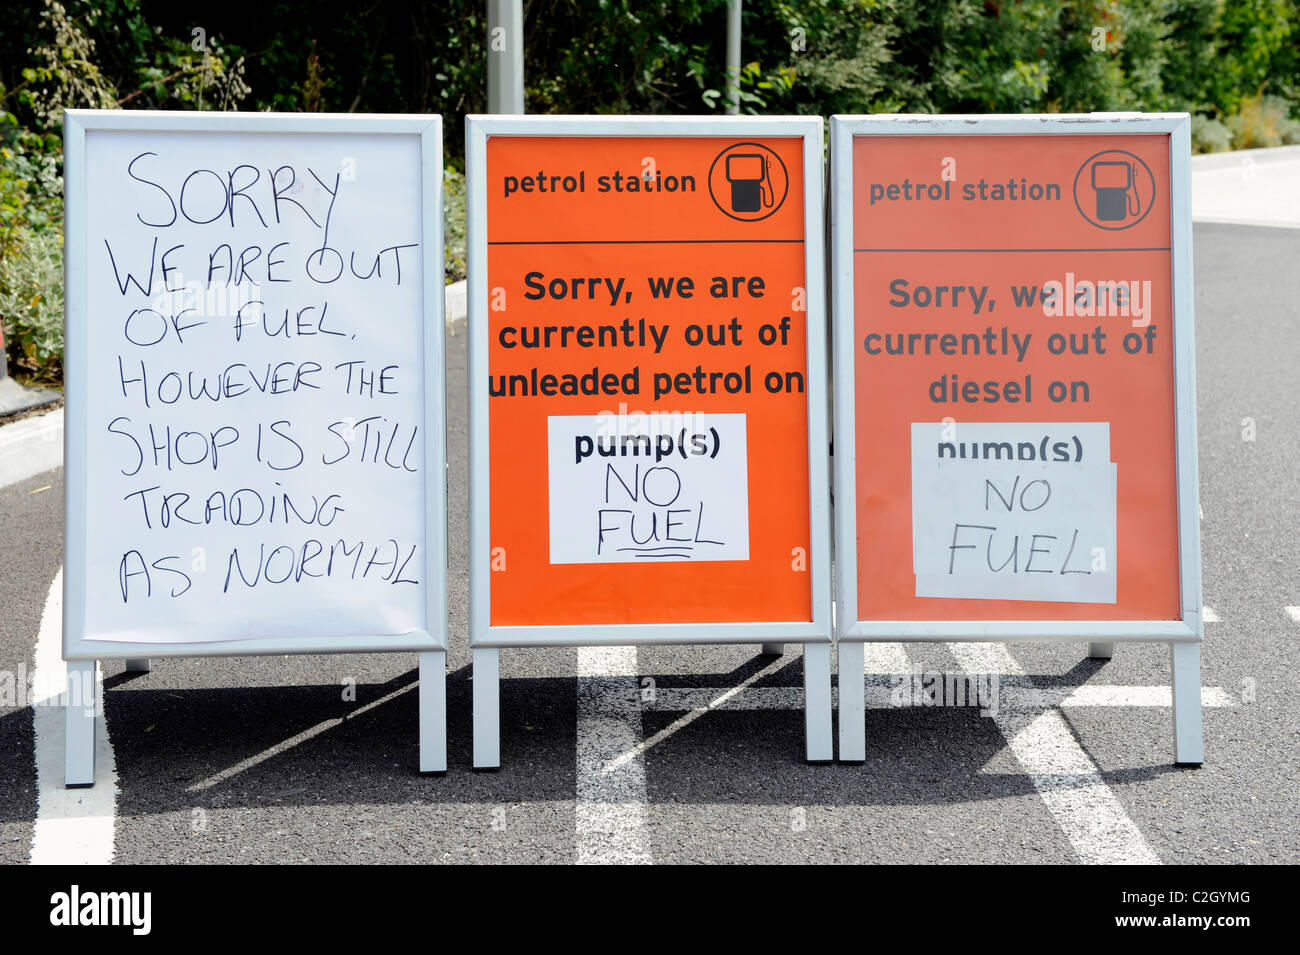 A petrol station at Sainsbury's with a sign saying sorry no fuel during National strike by hauliers, UK Stock Photo